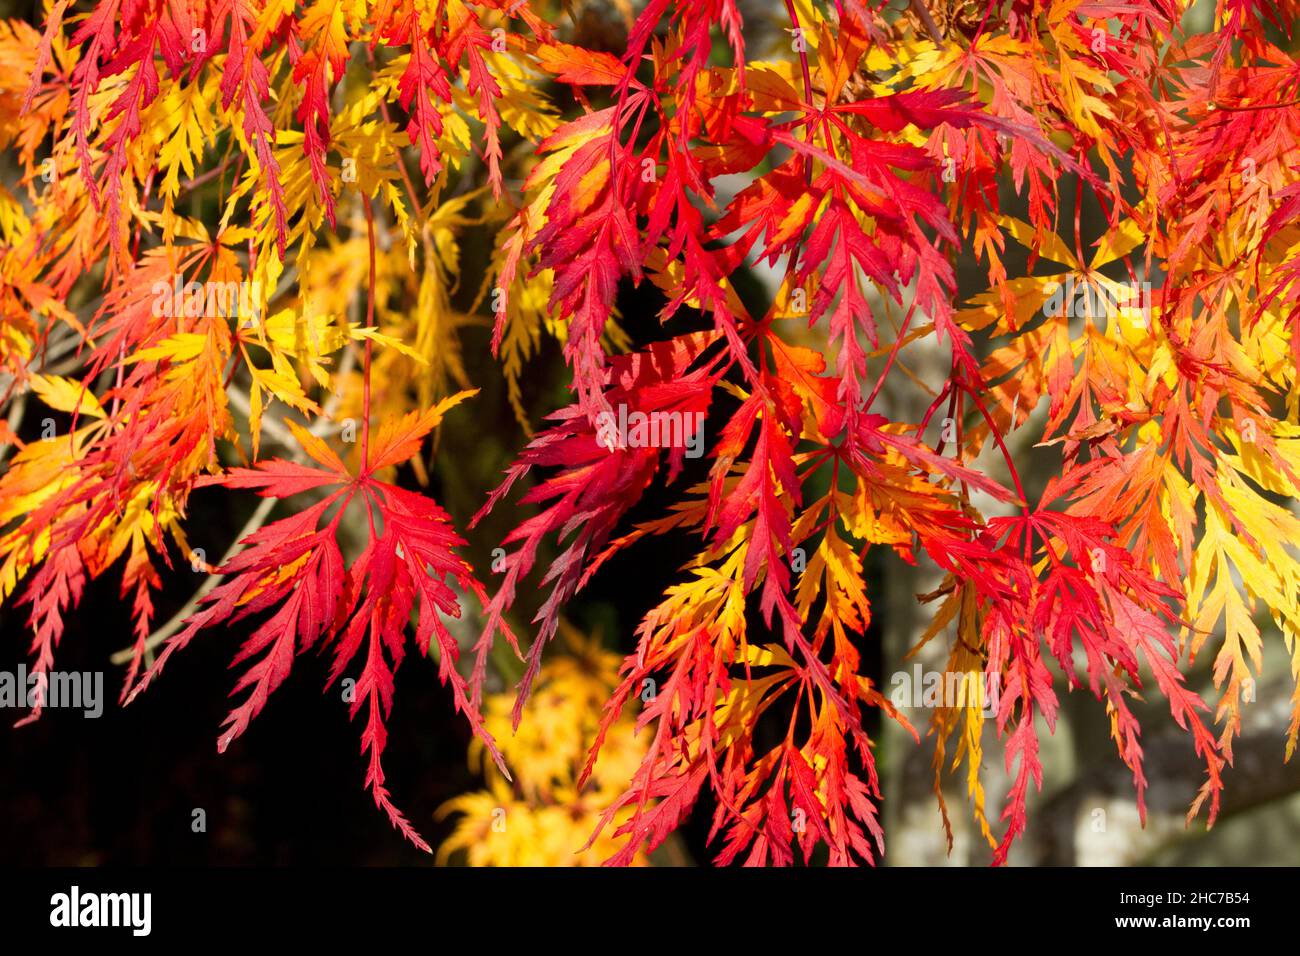 An autumn/fall scene of the colourful leaves of a Japanese Maple (Acer palmatum) tree in a garden in Nanaimo, Vancouver Island, BC, Canada in November Stock Photo